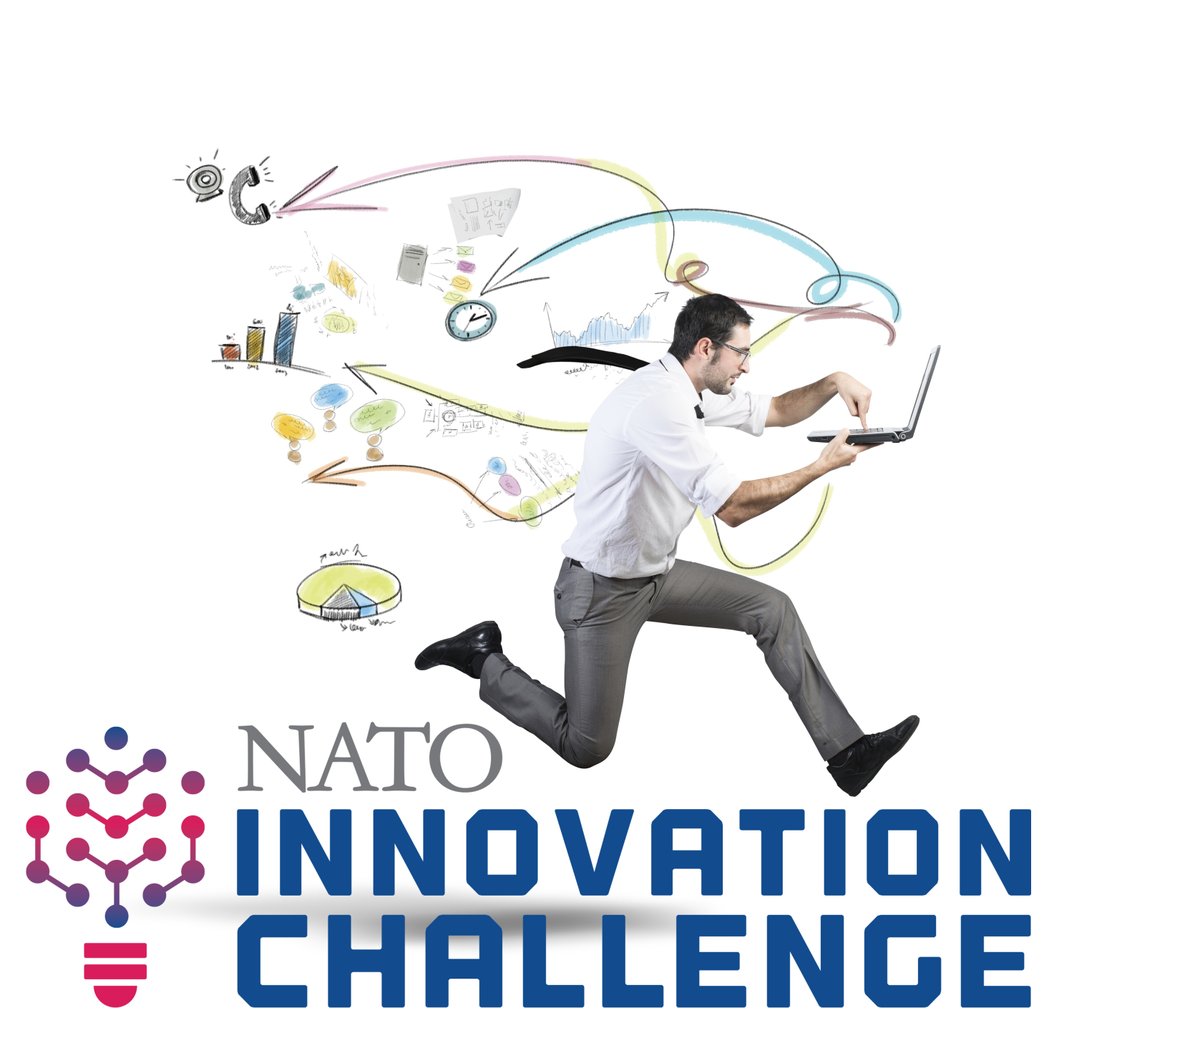 Today is the last day to submit solutions to the NATO mobility innovation challenge. web.cvent.com/event/c8cd6c1e… #WeAreNATO #Innovation